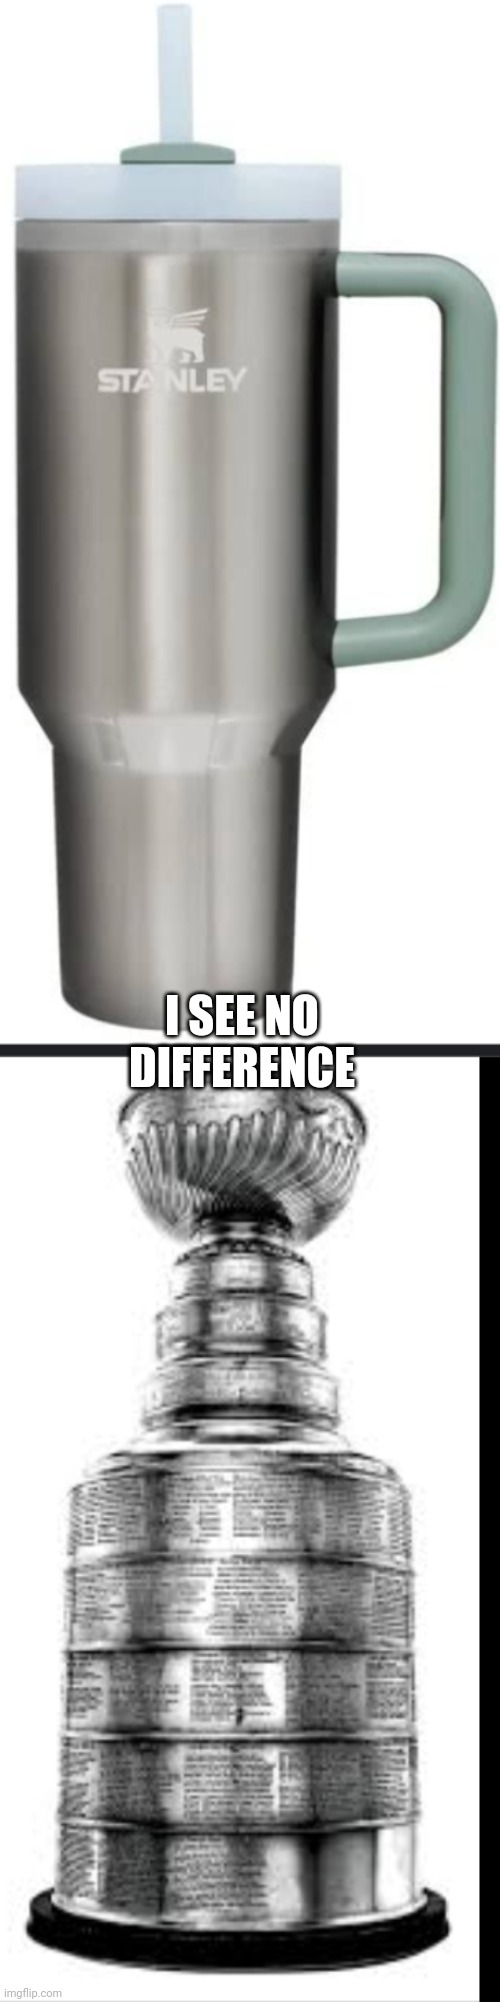 Stanley cup meme | I SEE NO DIFFERENCE | image tagged in memes,sports | made w/ Imgflip meme maker